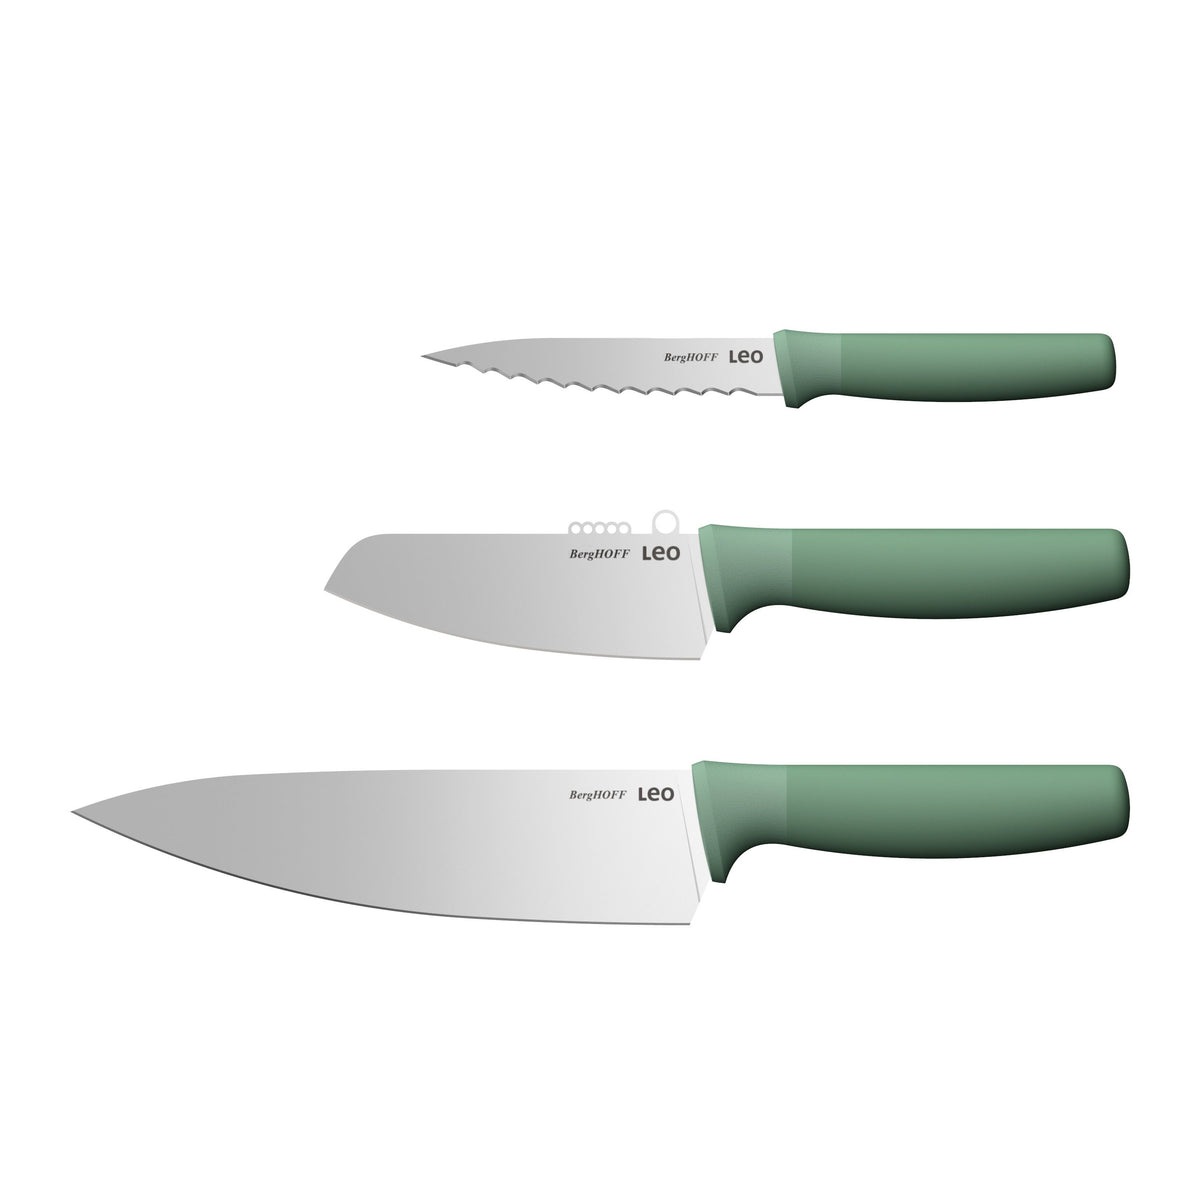 BergHOFF Forest Stainless Steel 3PC Specialty Knife Set, Recycled Material 3950529